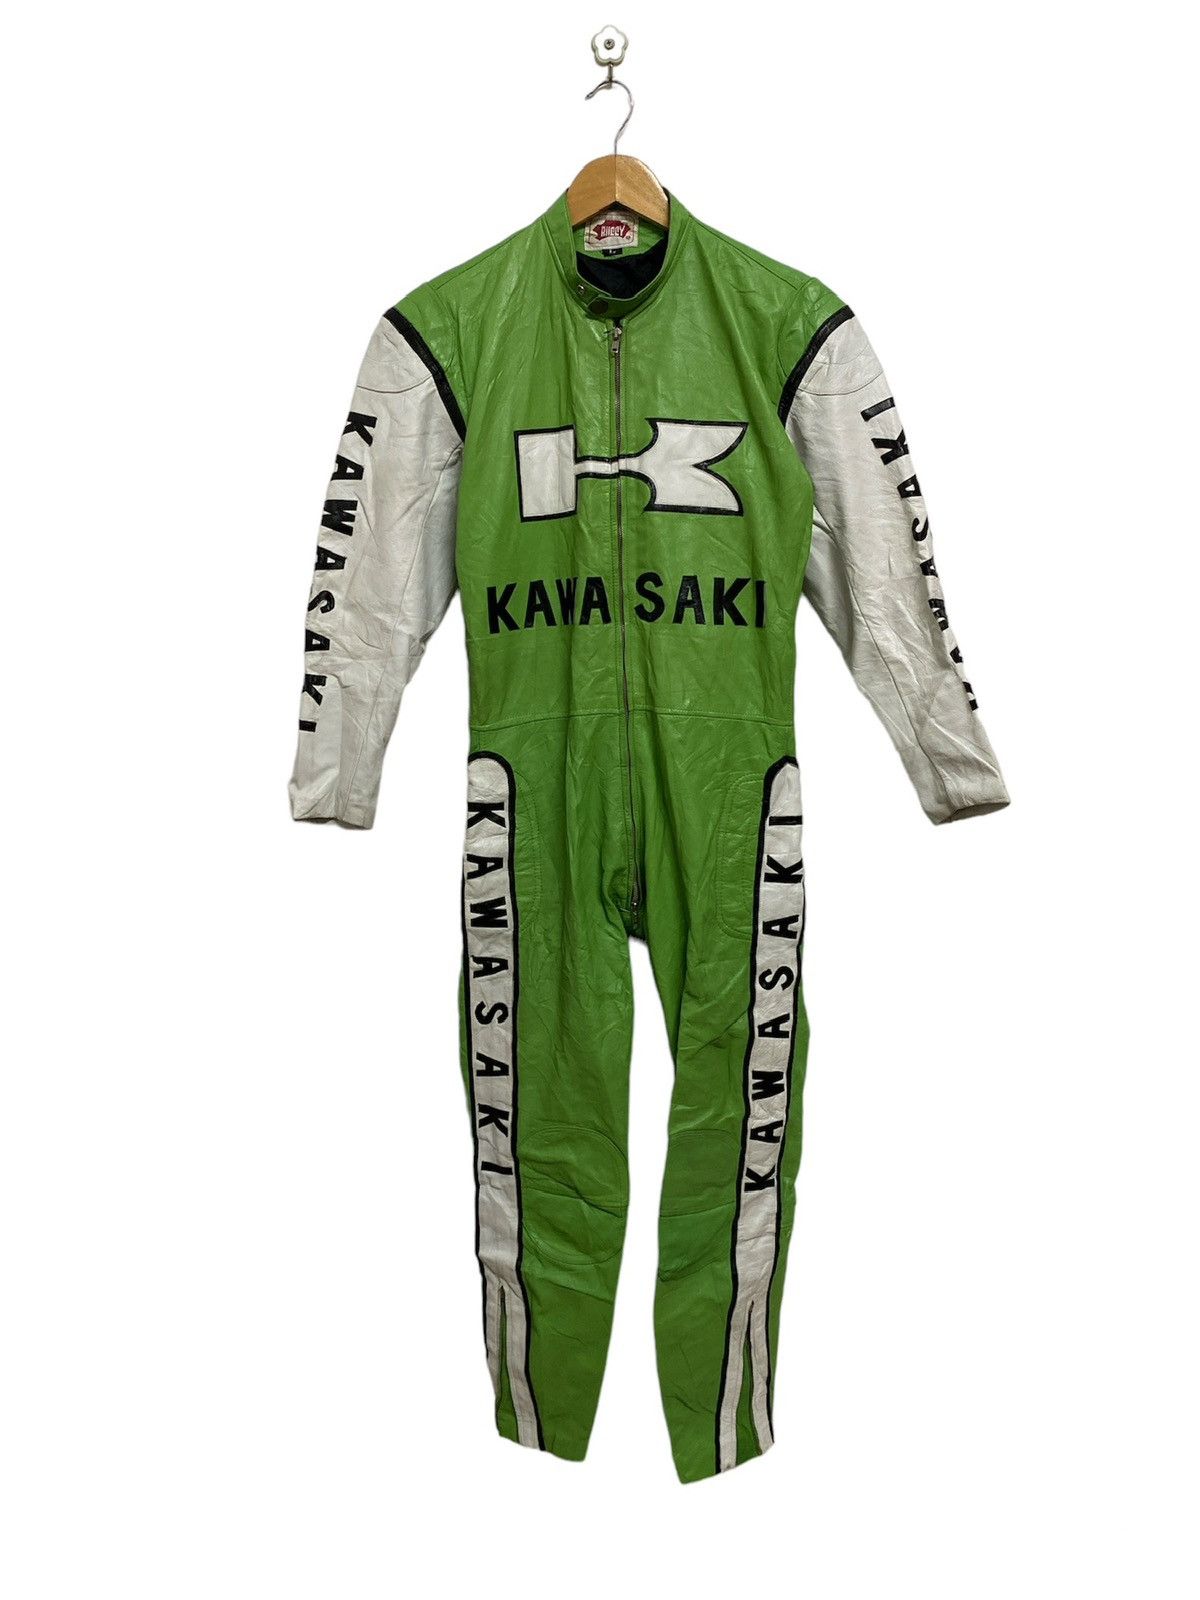 Sports Specialties - KAWASAKI Leather Racing Suit Overall - 1